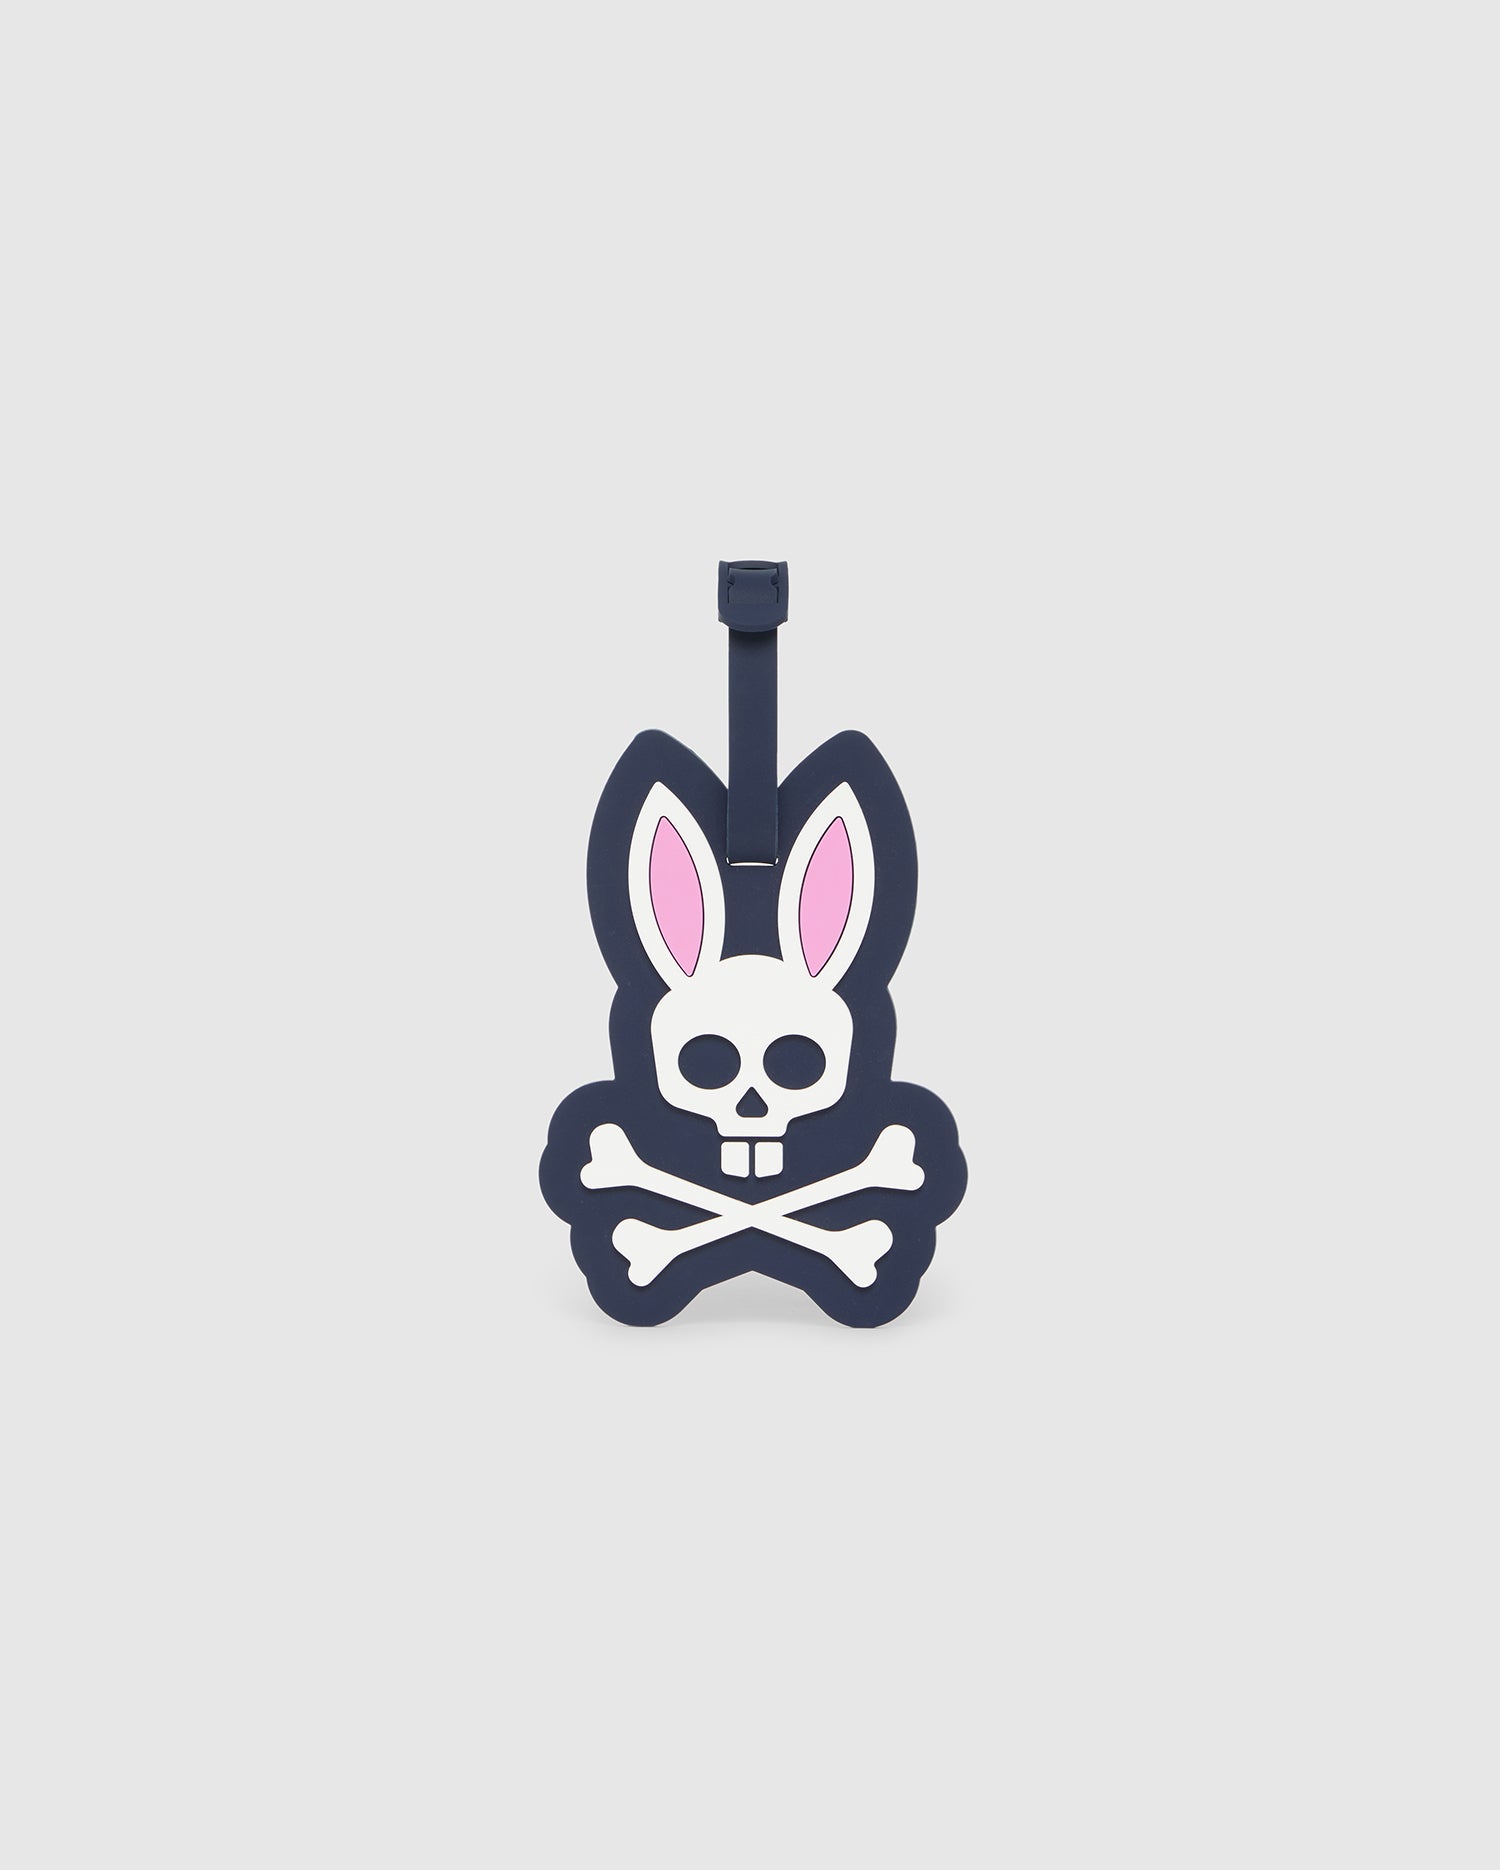 The Psycho Bunny MENS LUGGAGE TAG - B6A387B200 is a detachable silicone luggage tag featuring a cartoon design of a skull with rabbit ears and crossbones underneath. The skull has a simple outline with a concealed bunny nose, with the ears in white and pink. The tag is primarily dark blue and white, complete with a personal information slot for added convenience.